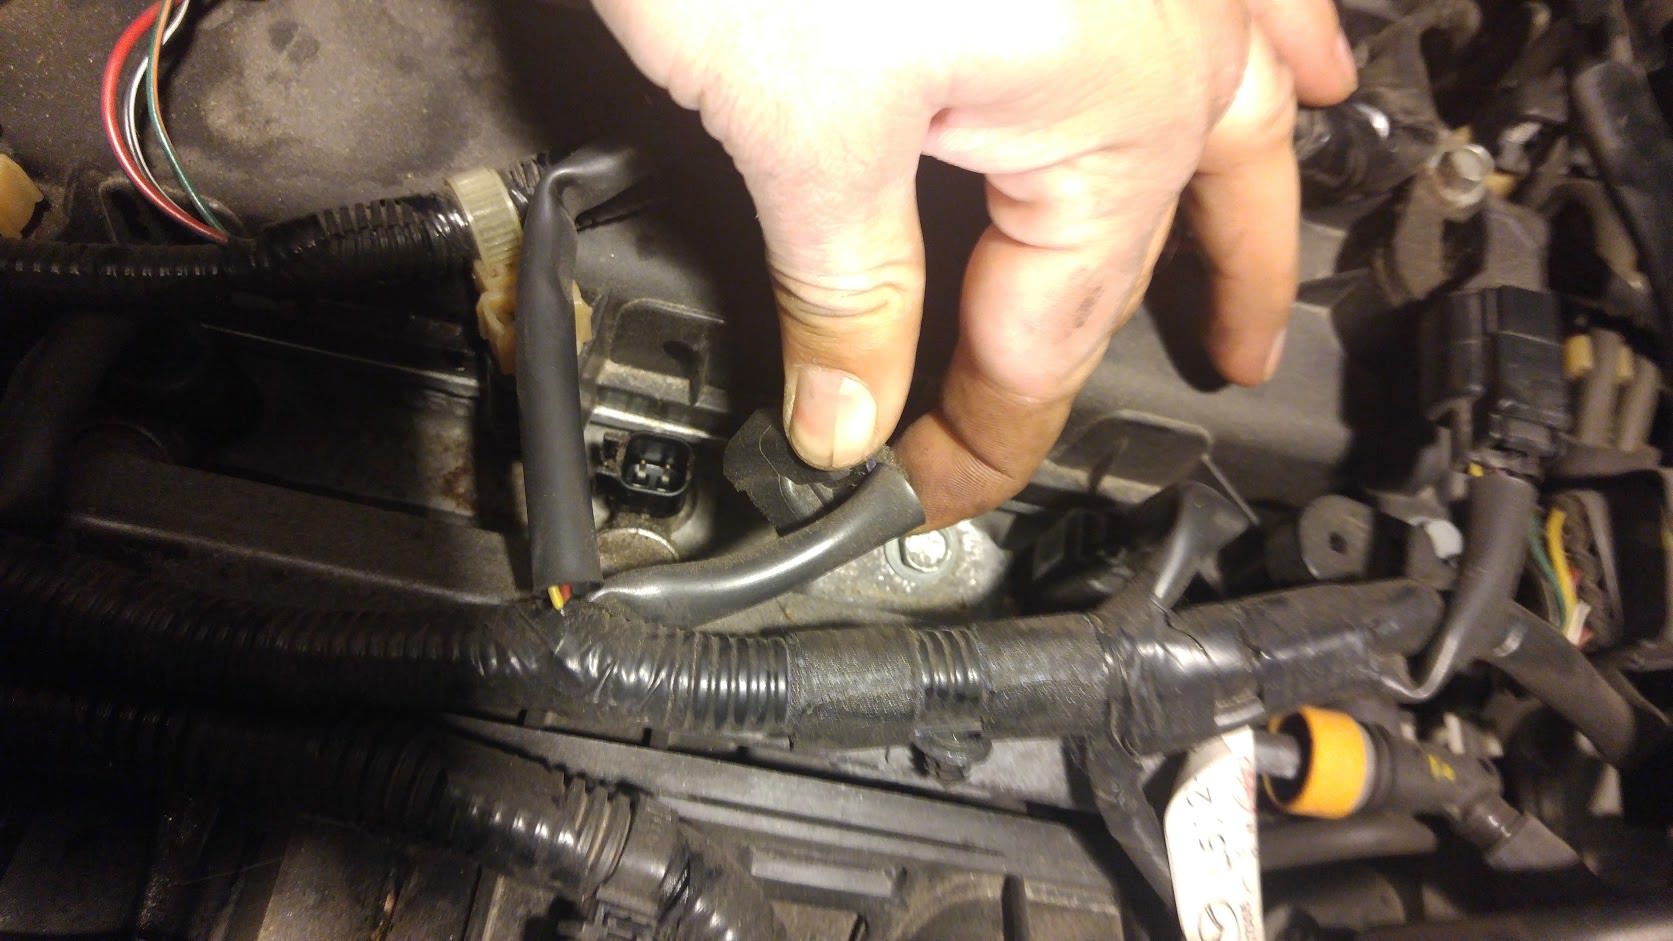 check if spark plugs are firing in gasoline engine 